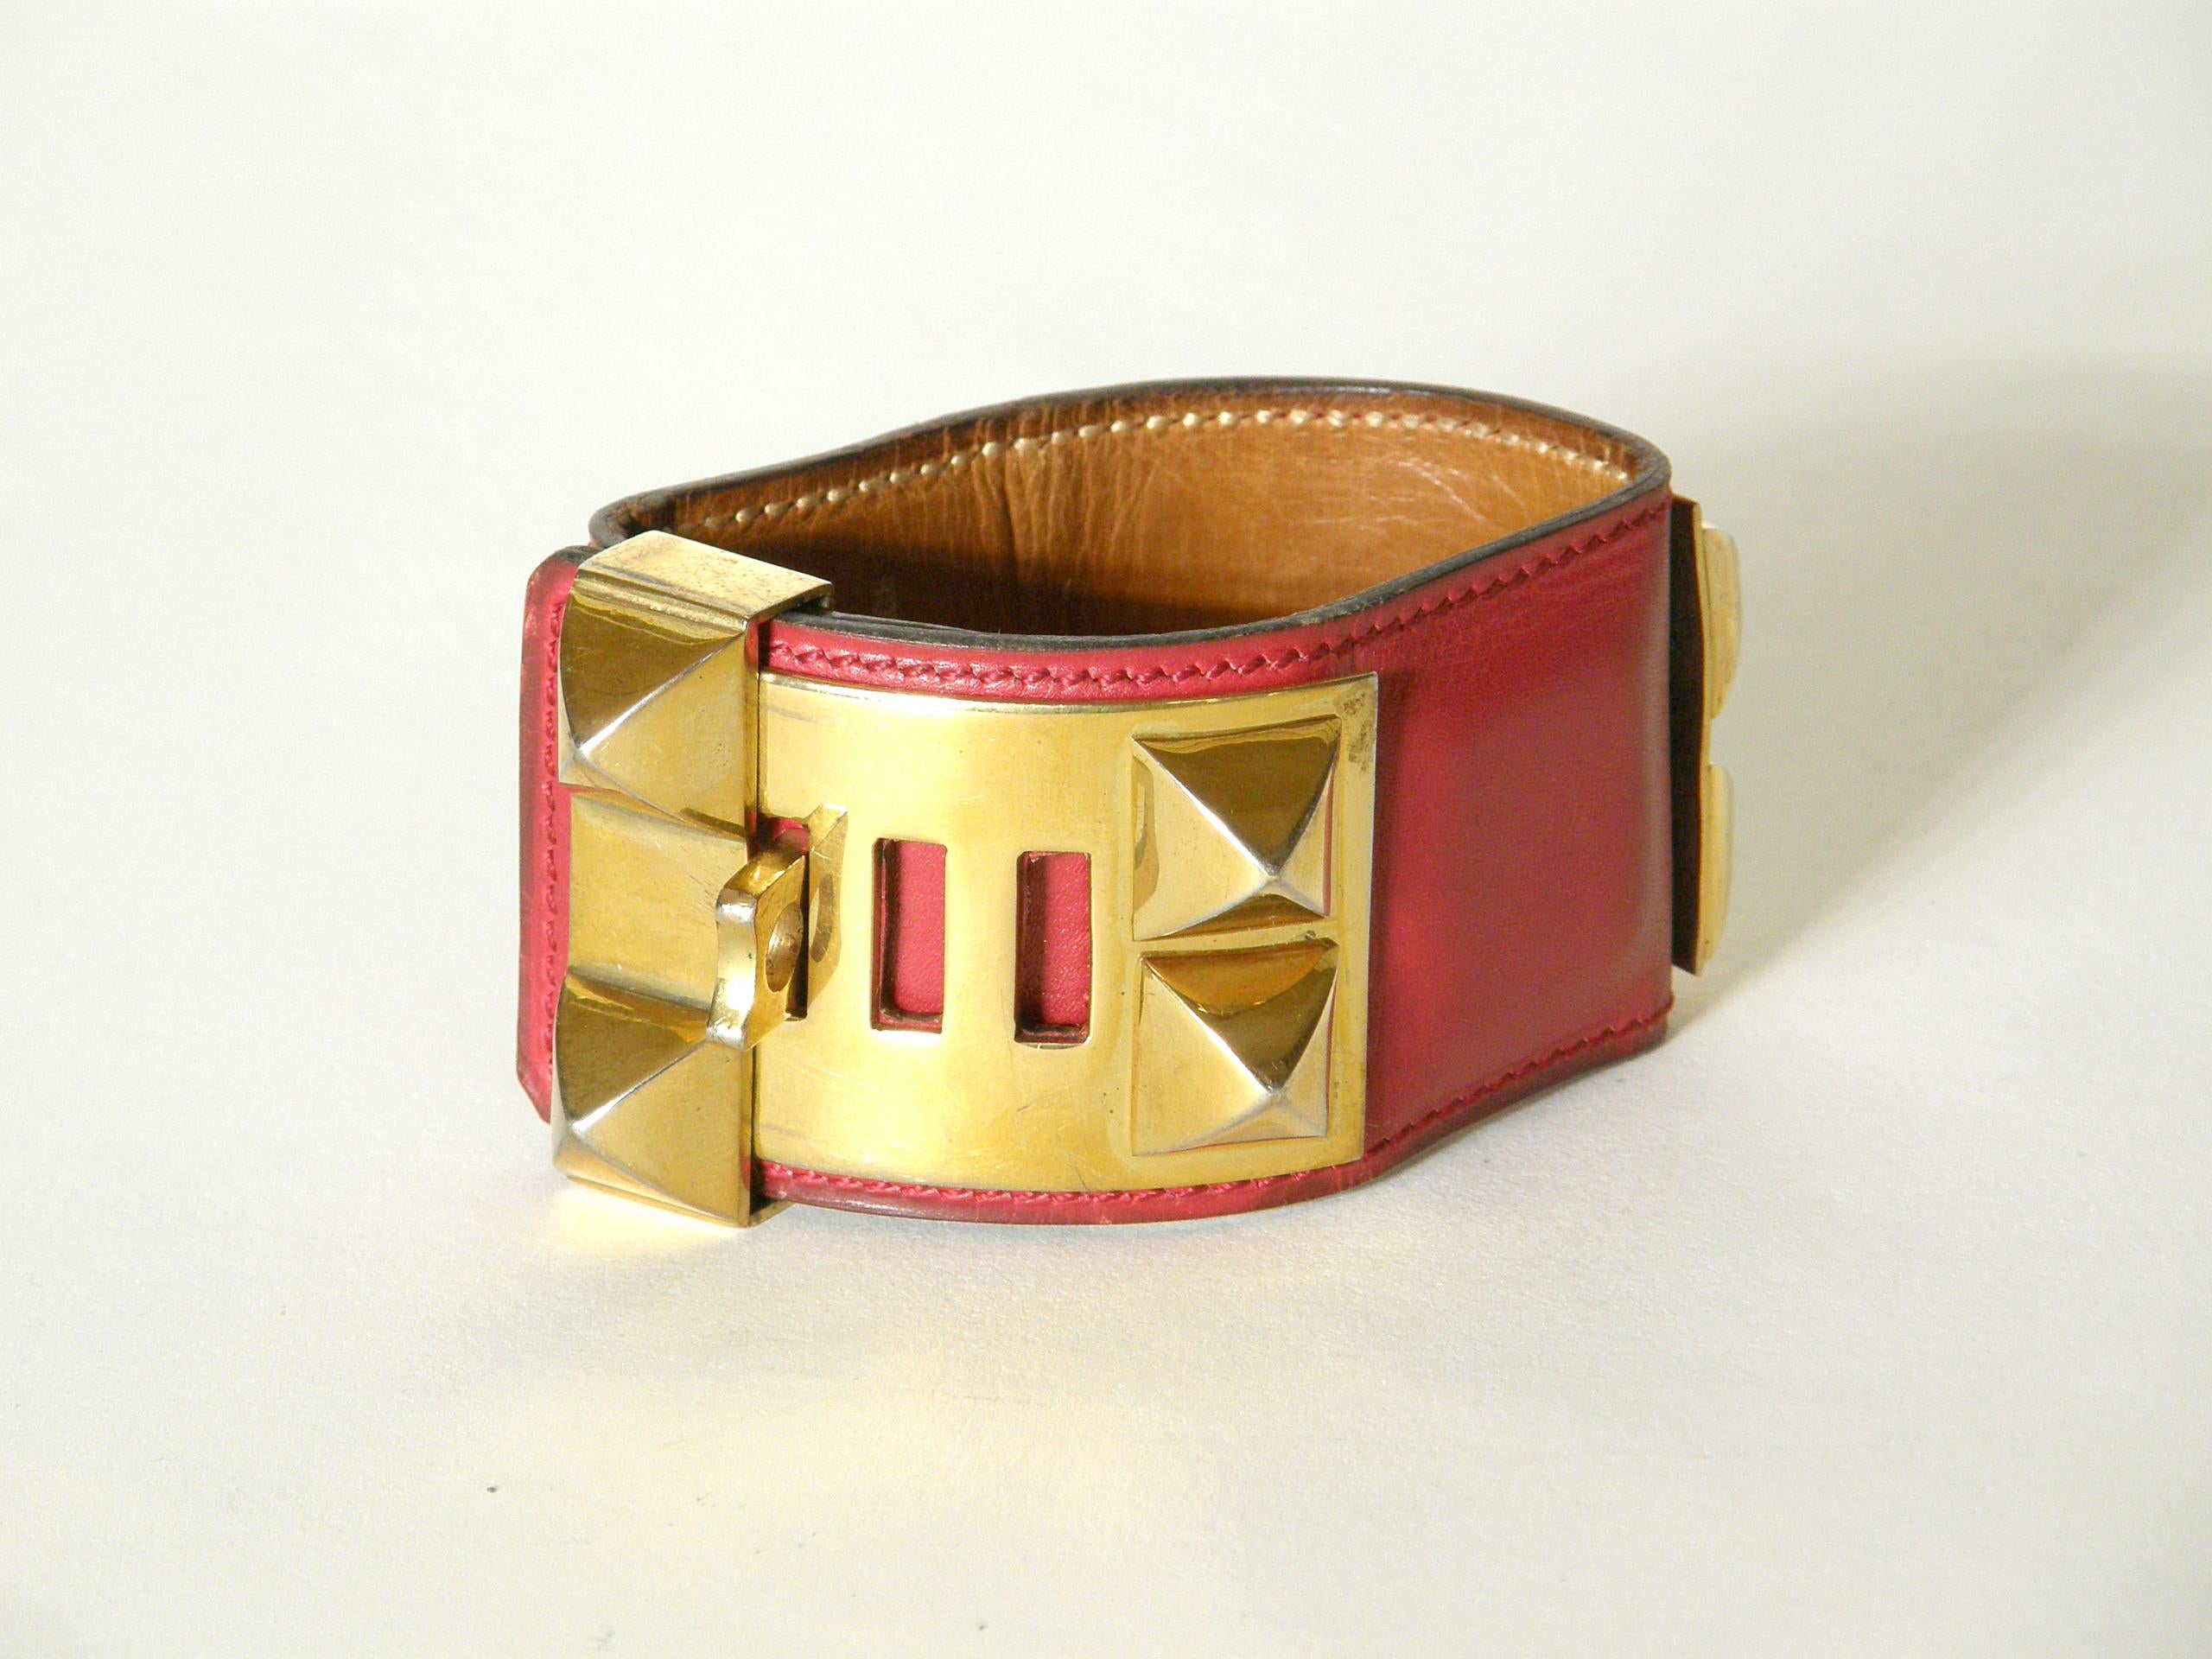 This iconic Hermès Collier de Chien cuff bracelet is made of lipstick red leather with gold plated hardware. This classic design was adapted from a custom designed dog collar made for a private client of Hermès in 1923. Due to the popularity of the